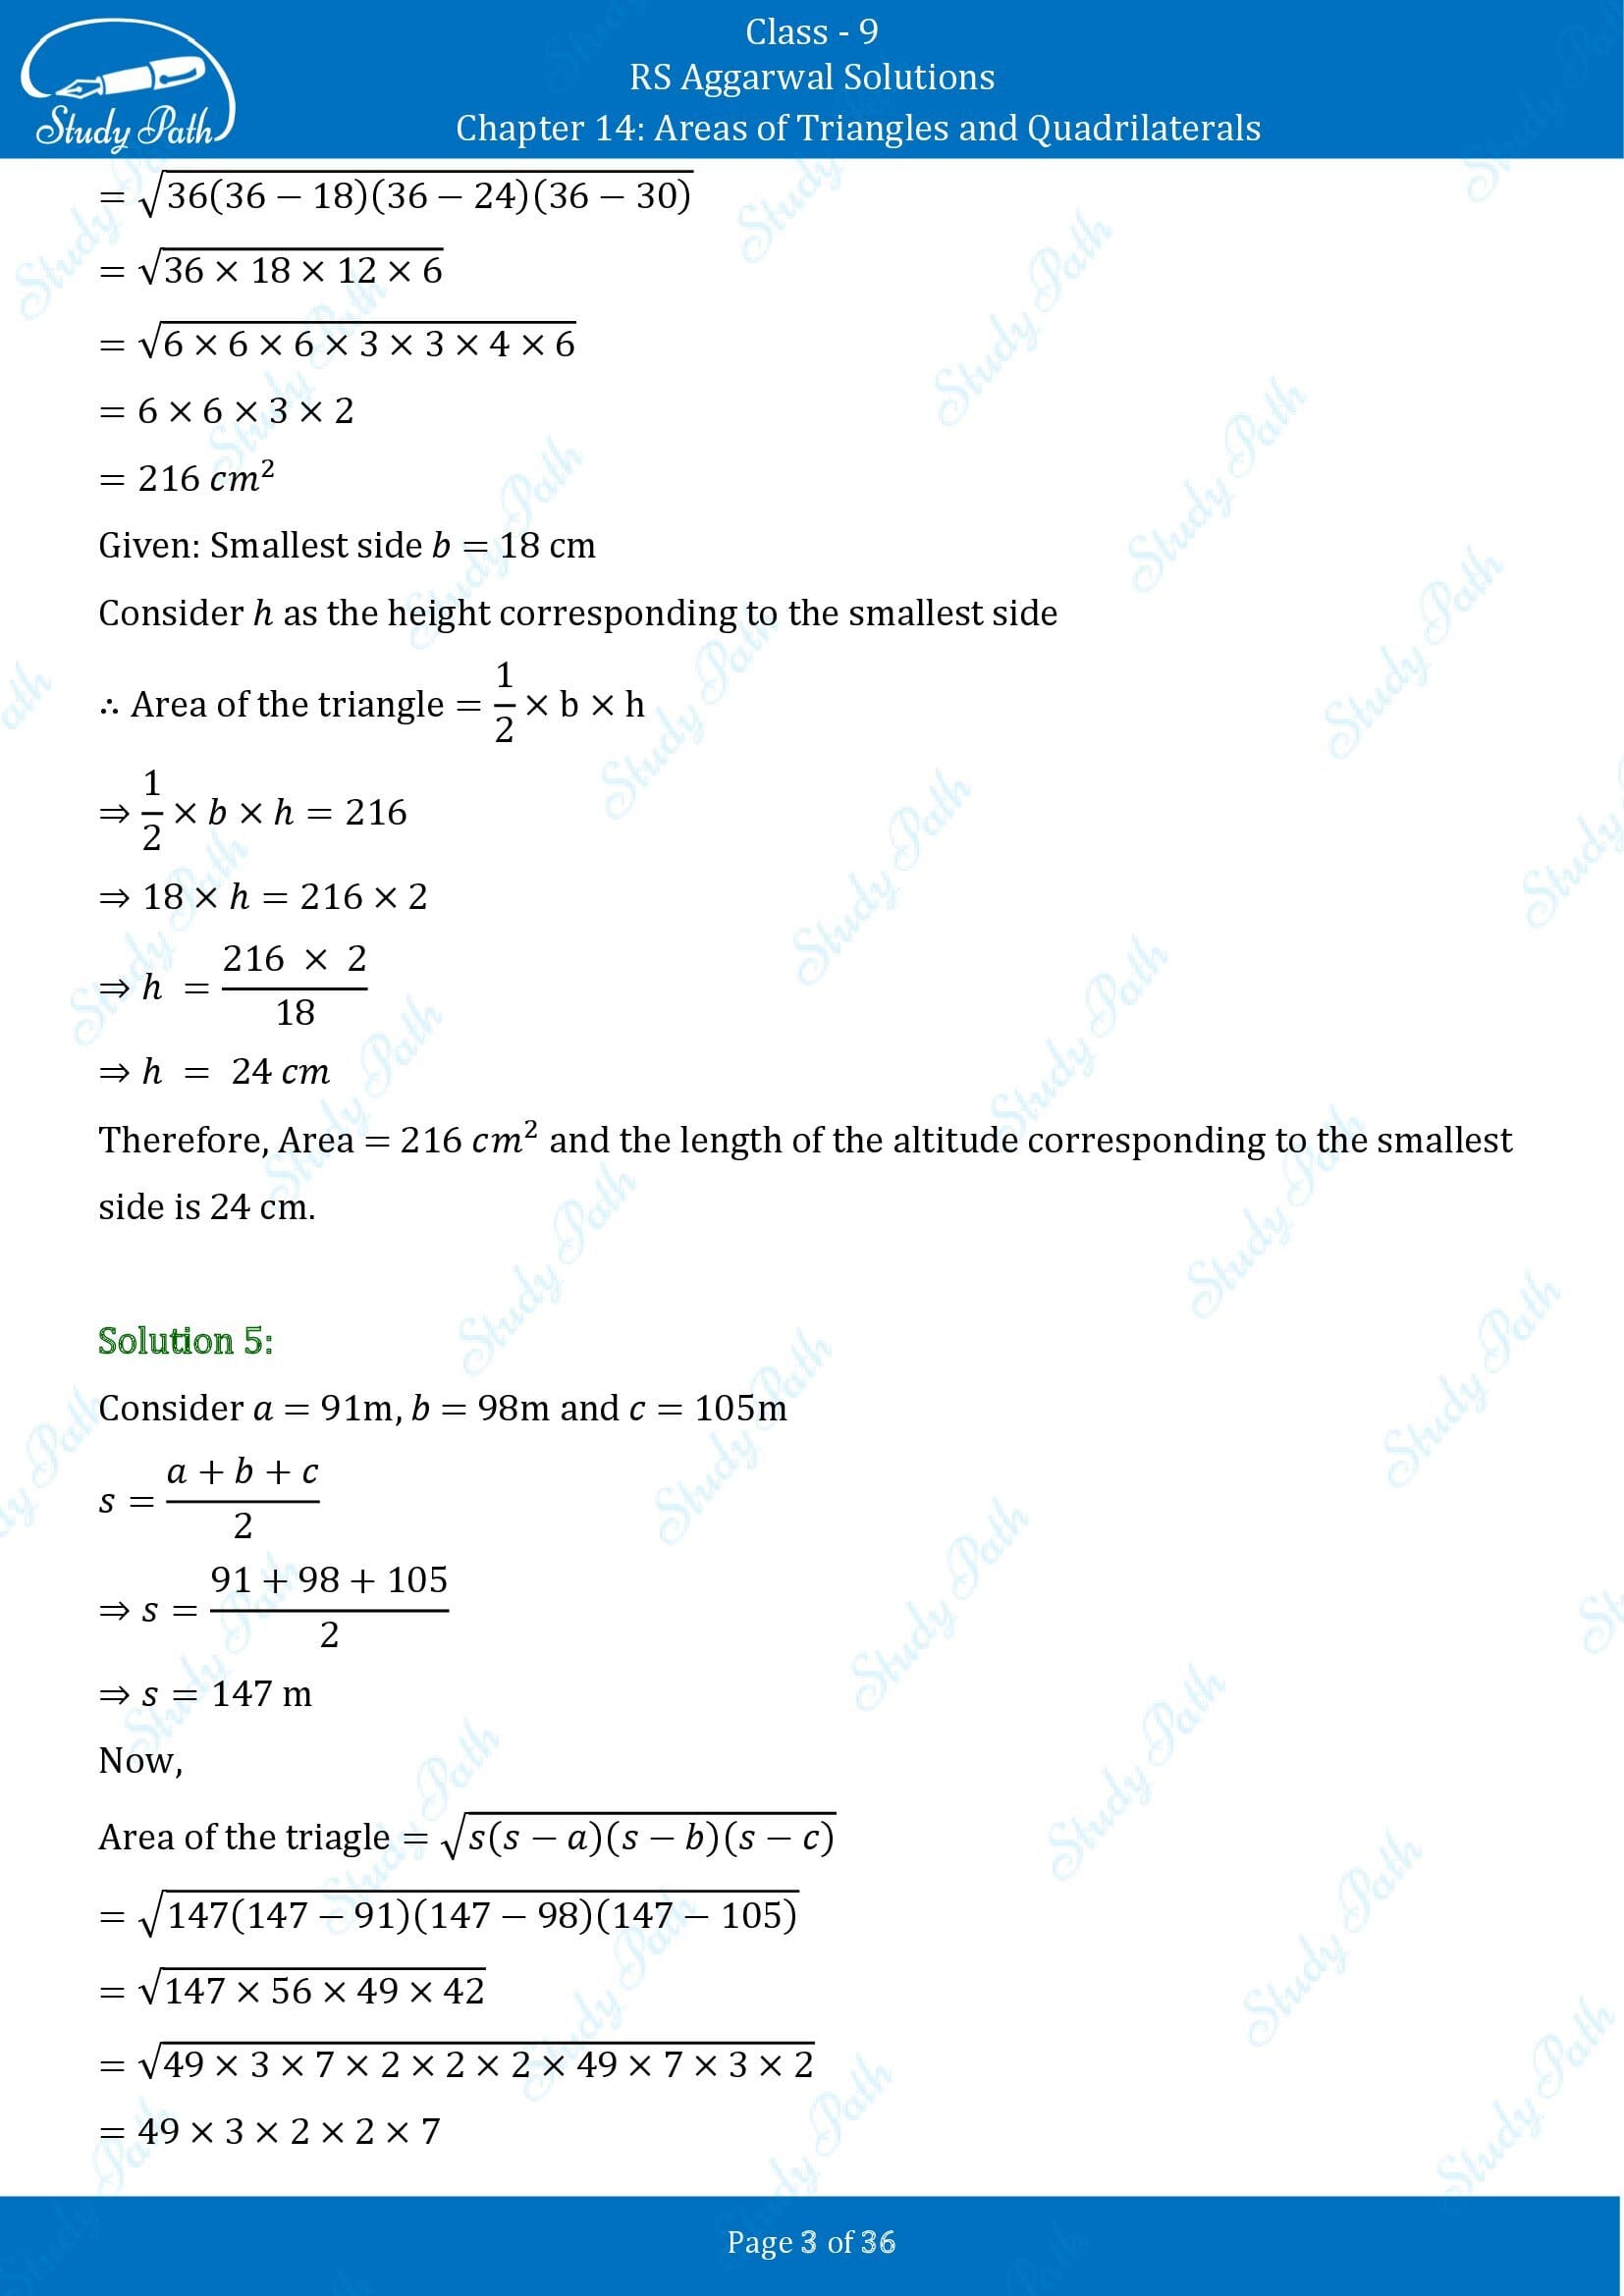 RS Aggarwal Solutions Class 9 Chapter 14 Areas of Triangles and Quadrilaterals Exercise 14 00003